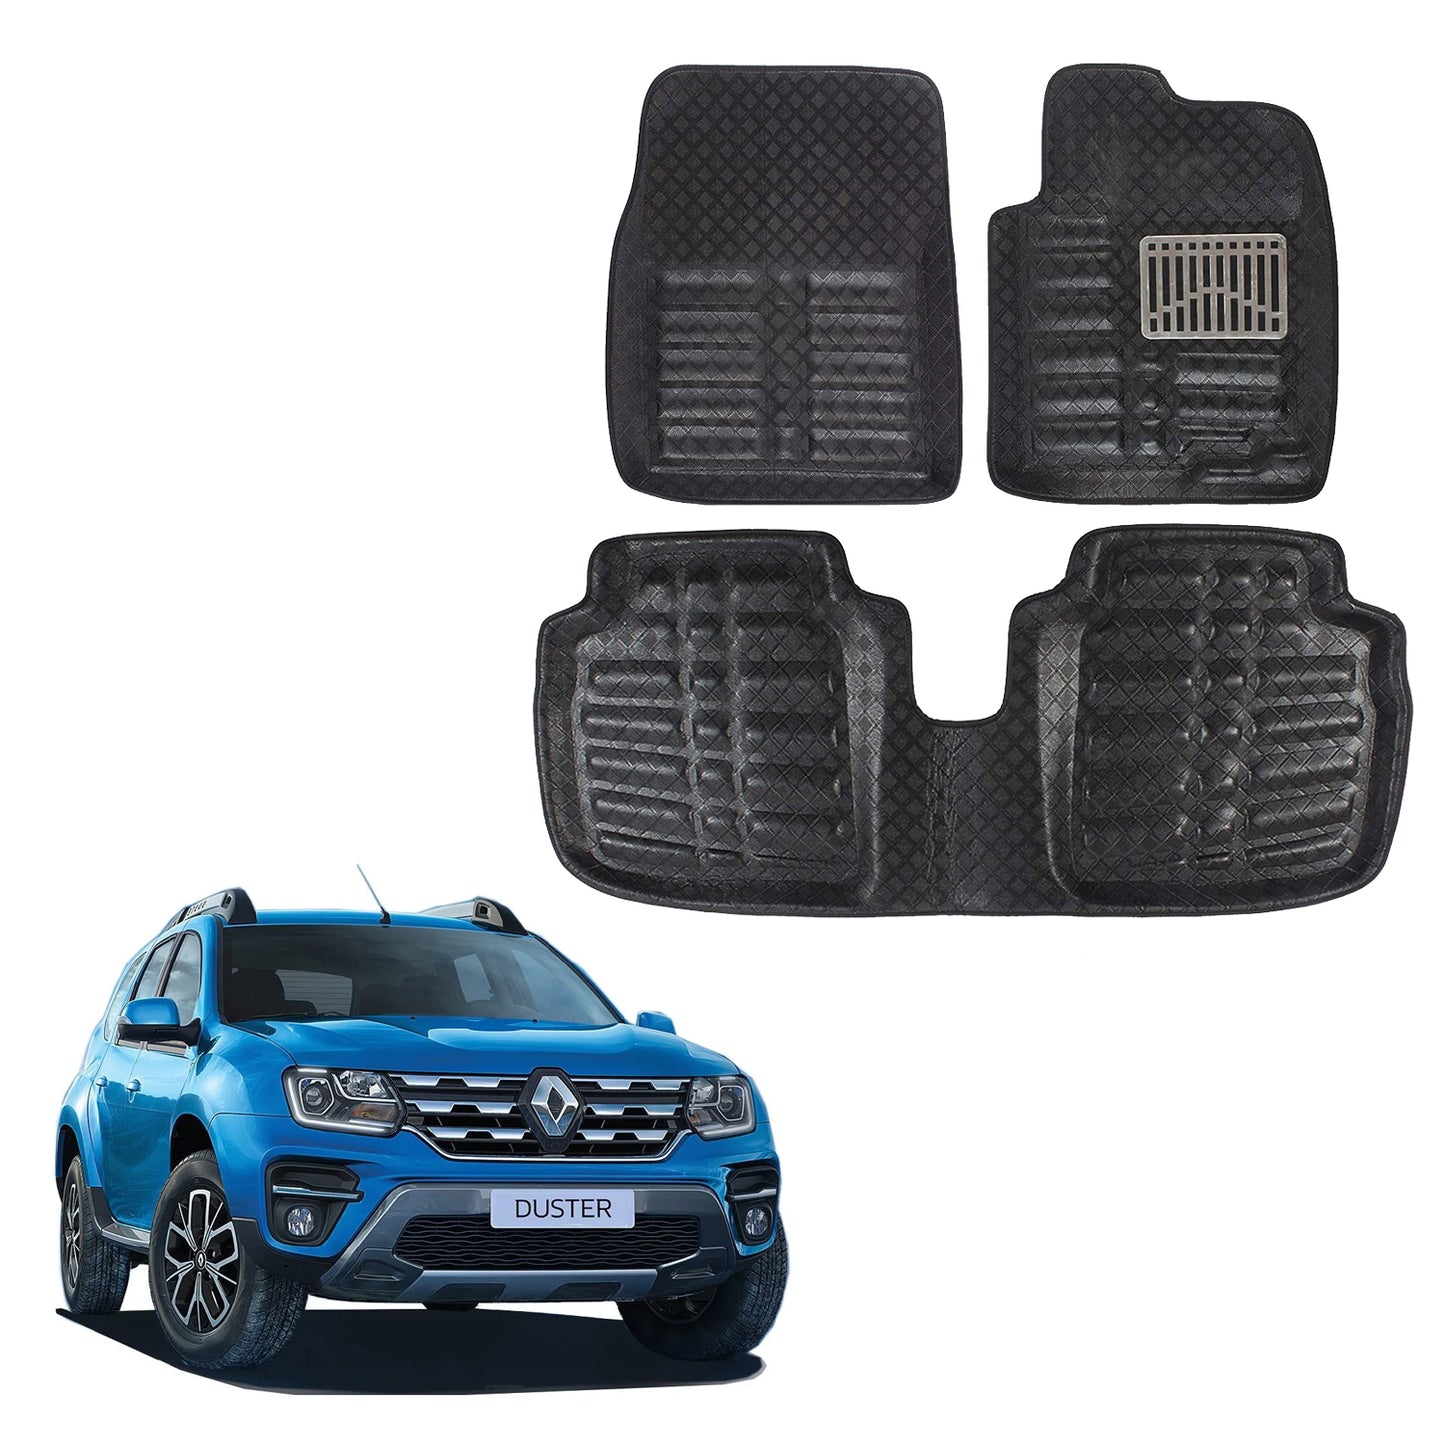 Oshotto 4D Artificial Leather Car Floor Mats For Renault Duster - Set of 3 (2 pcs Front & one Long Single Rear pc) - Black